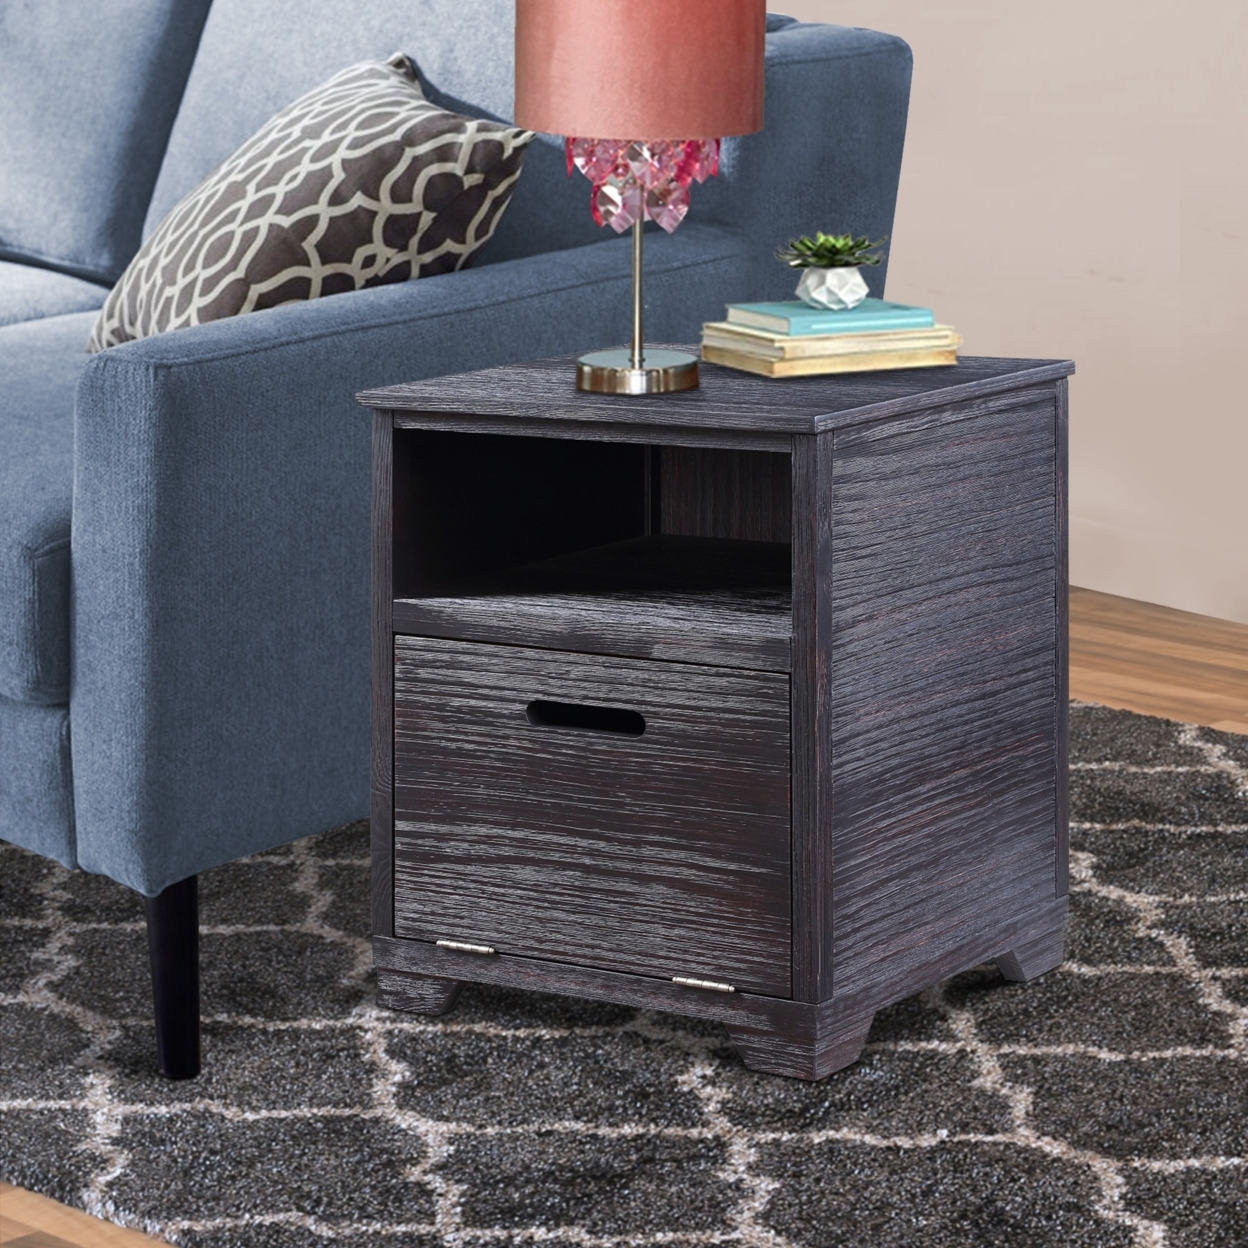 Rugged Textured Wooden End Table With Drop Down Storage, Black- Saltoro Sherpi